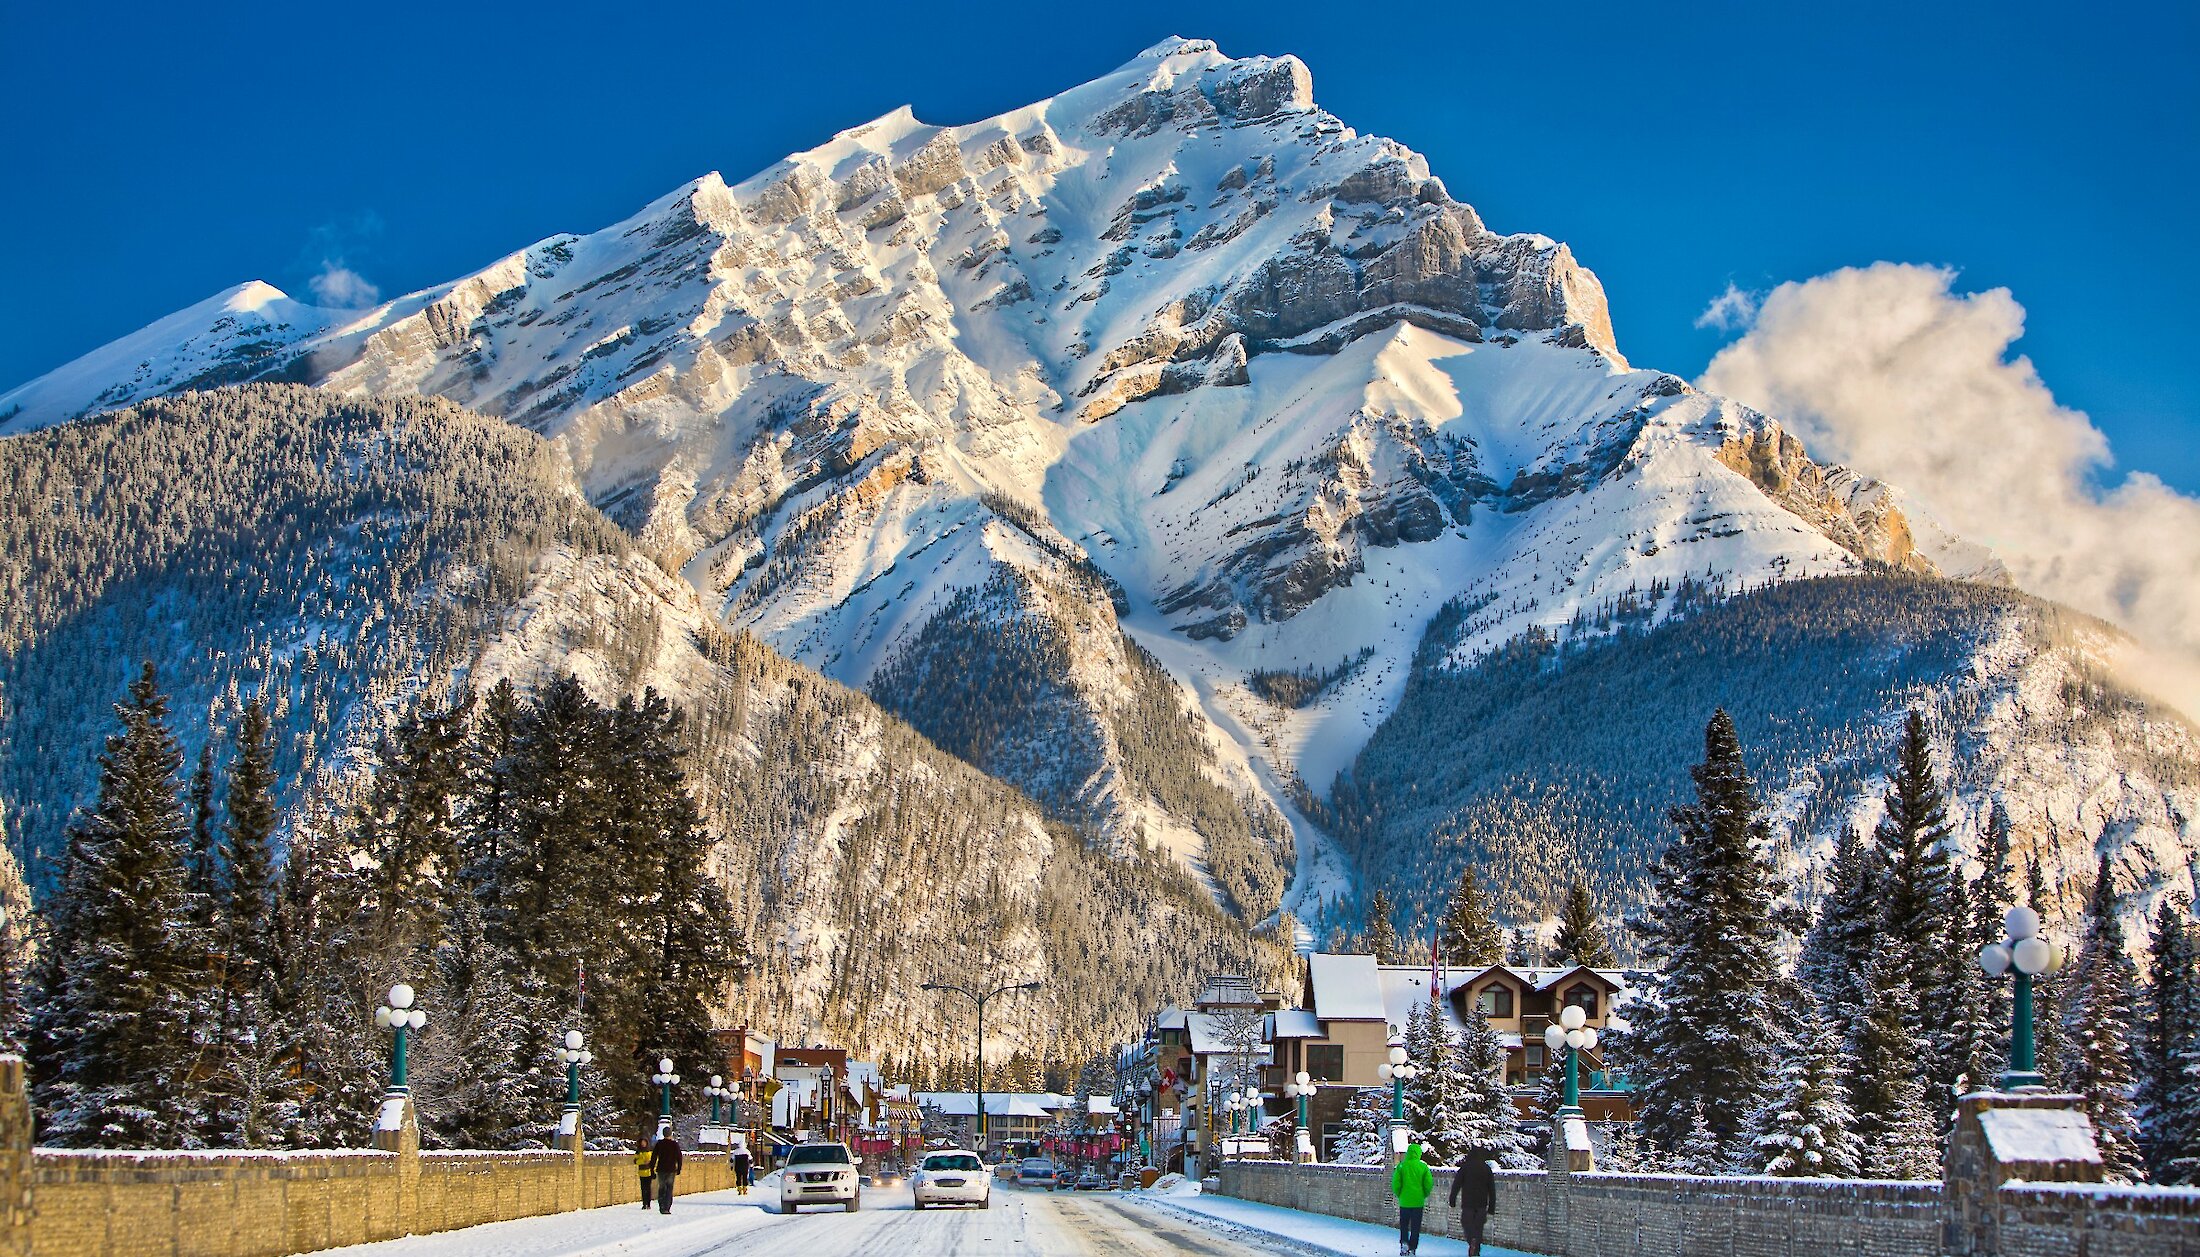 The view of Cascade Mountain in Banff from Banff Avenue